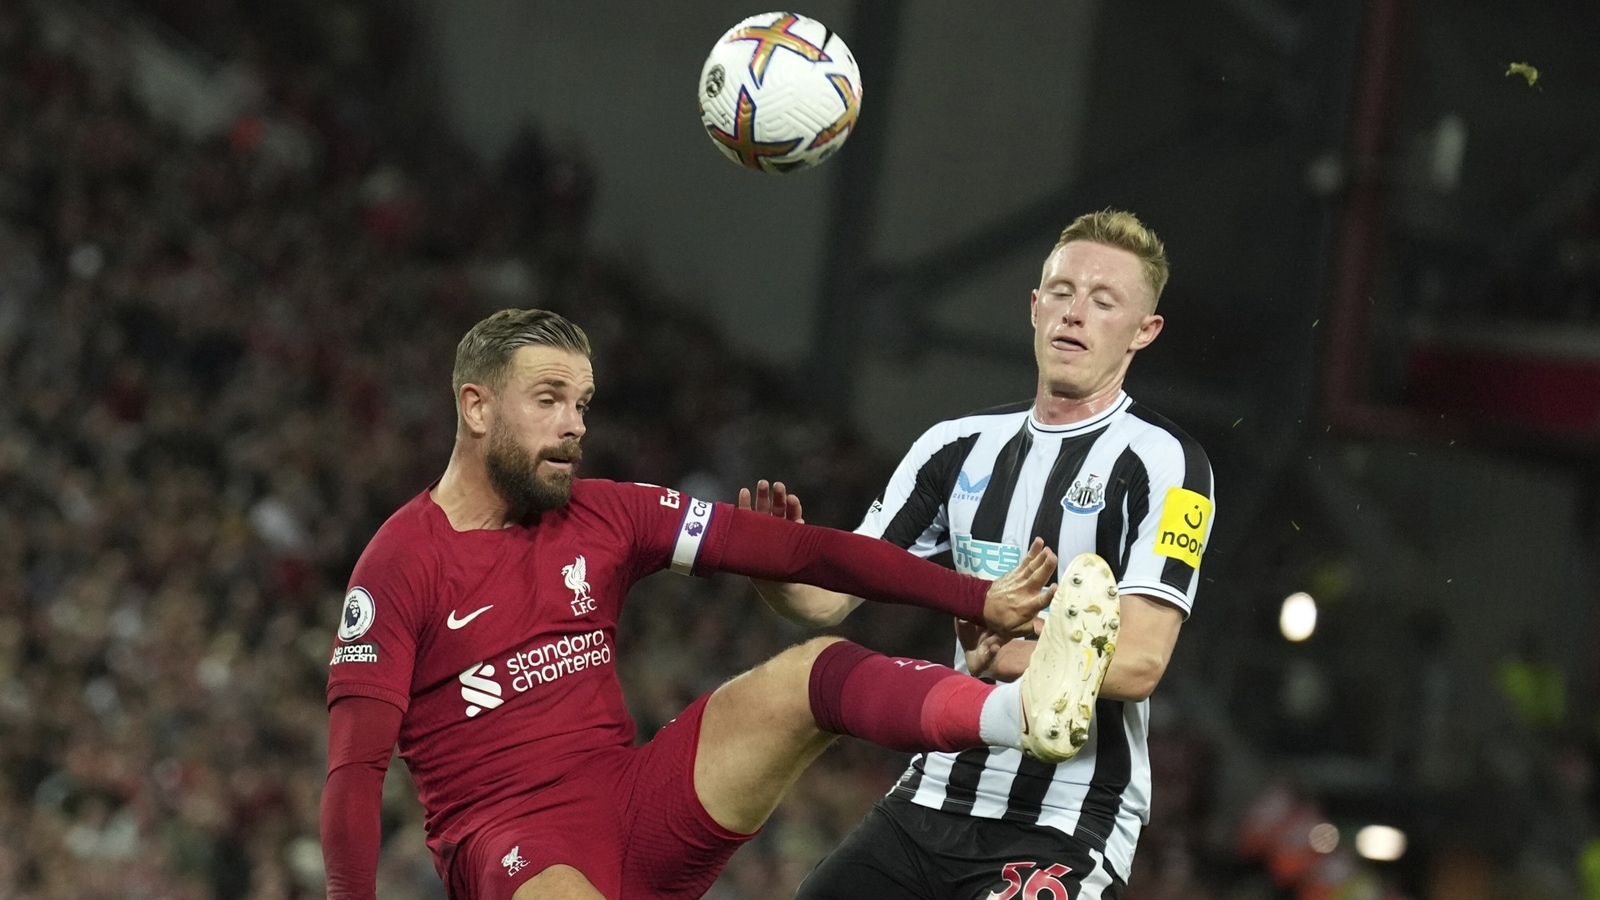 Soccer-Liverpool’s Jordan Henderson ruled out of Merseyside derby, Diogo Jota could return